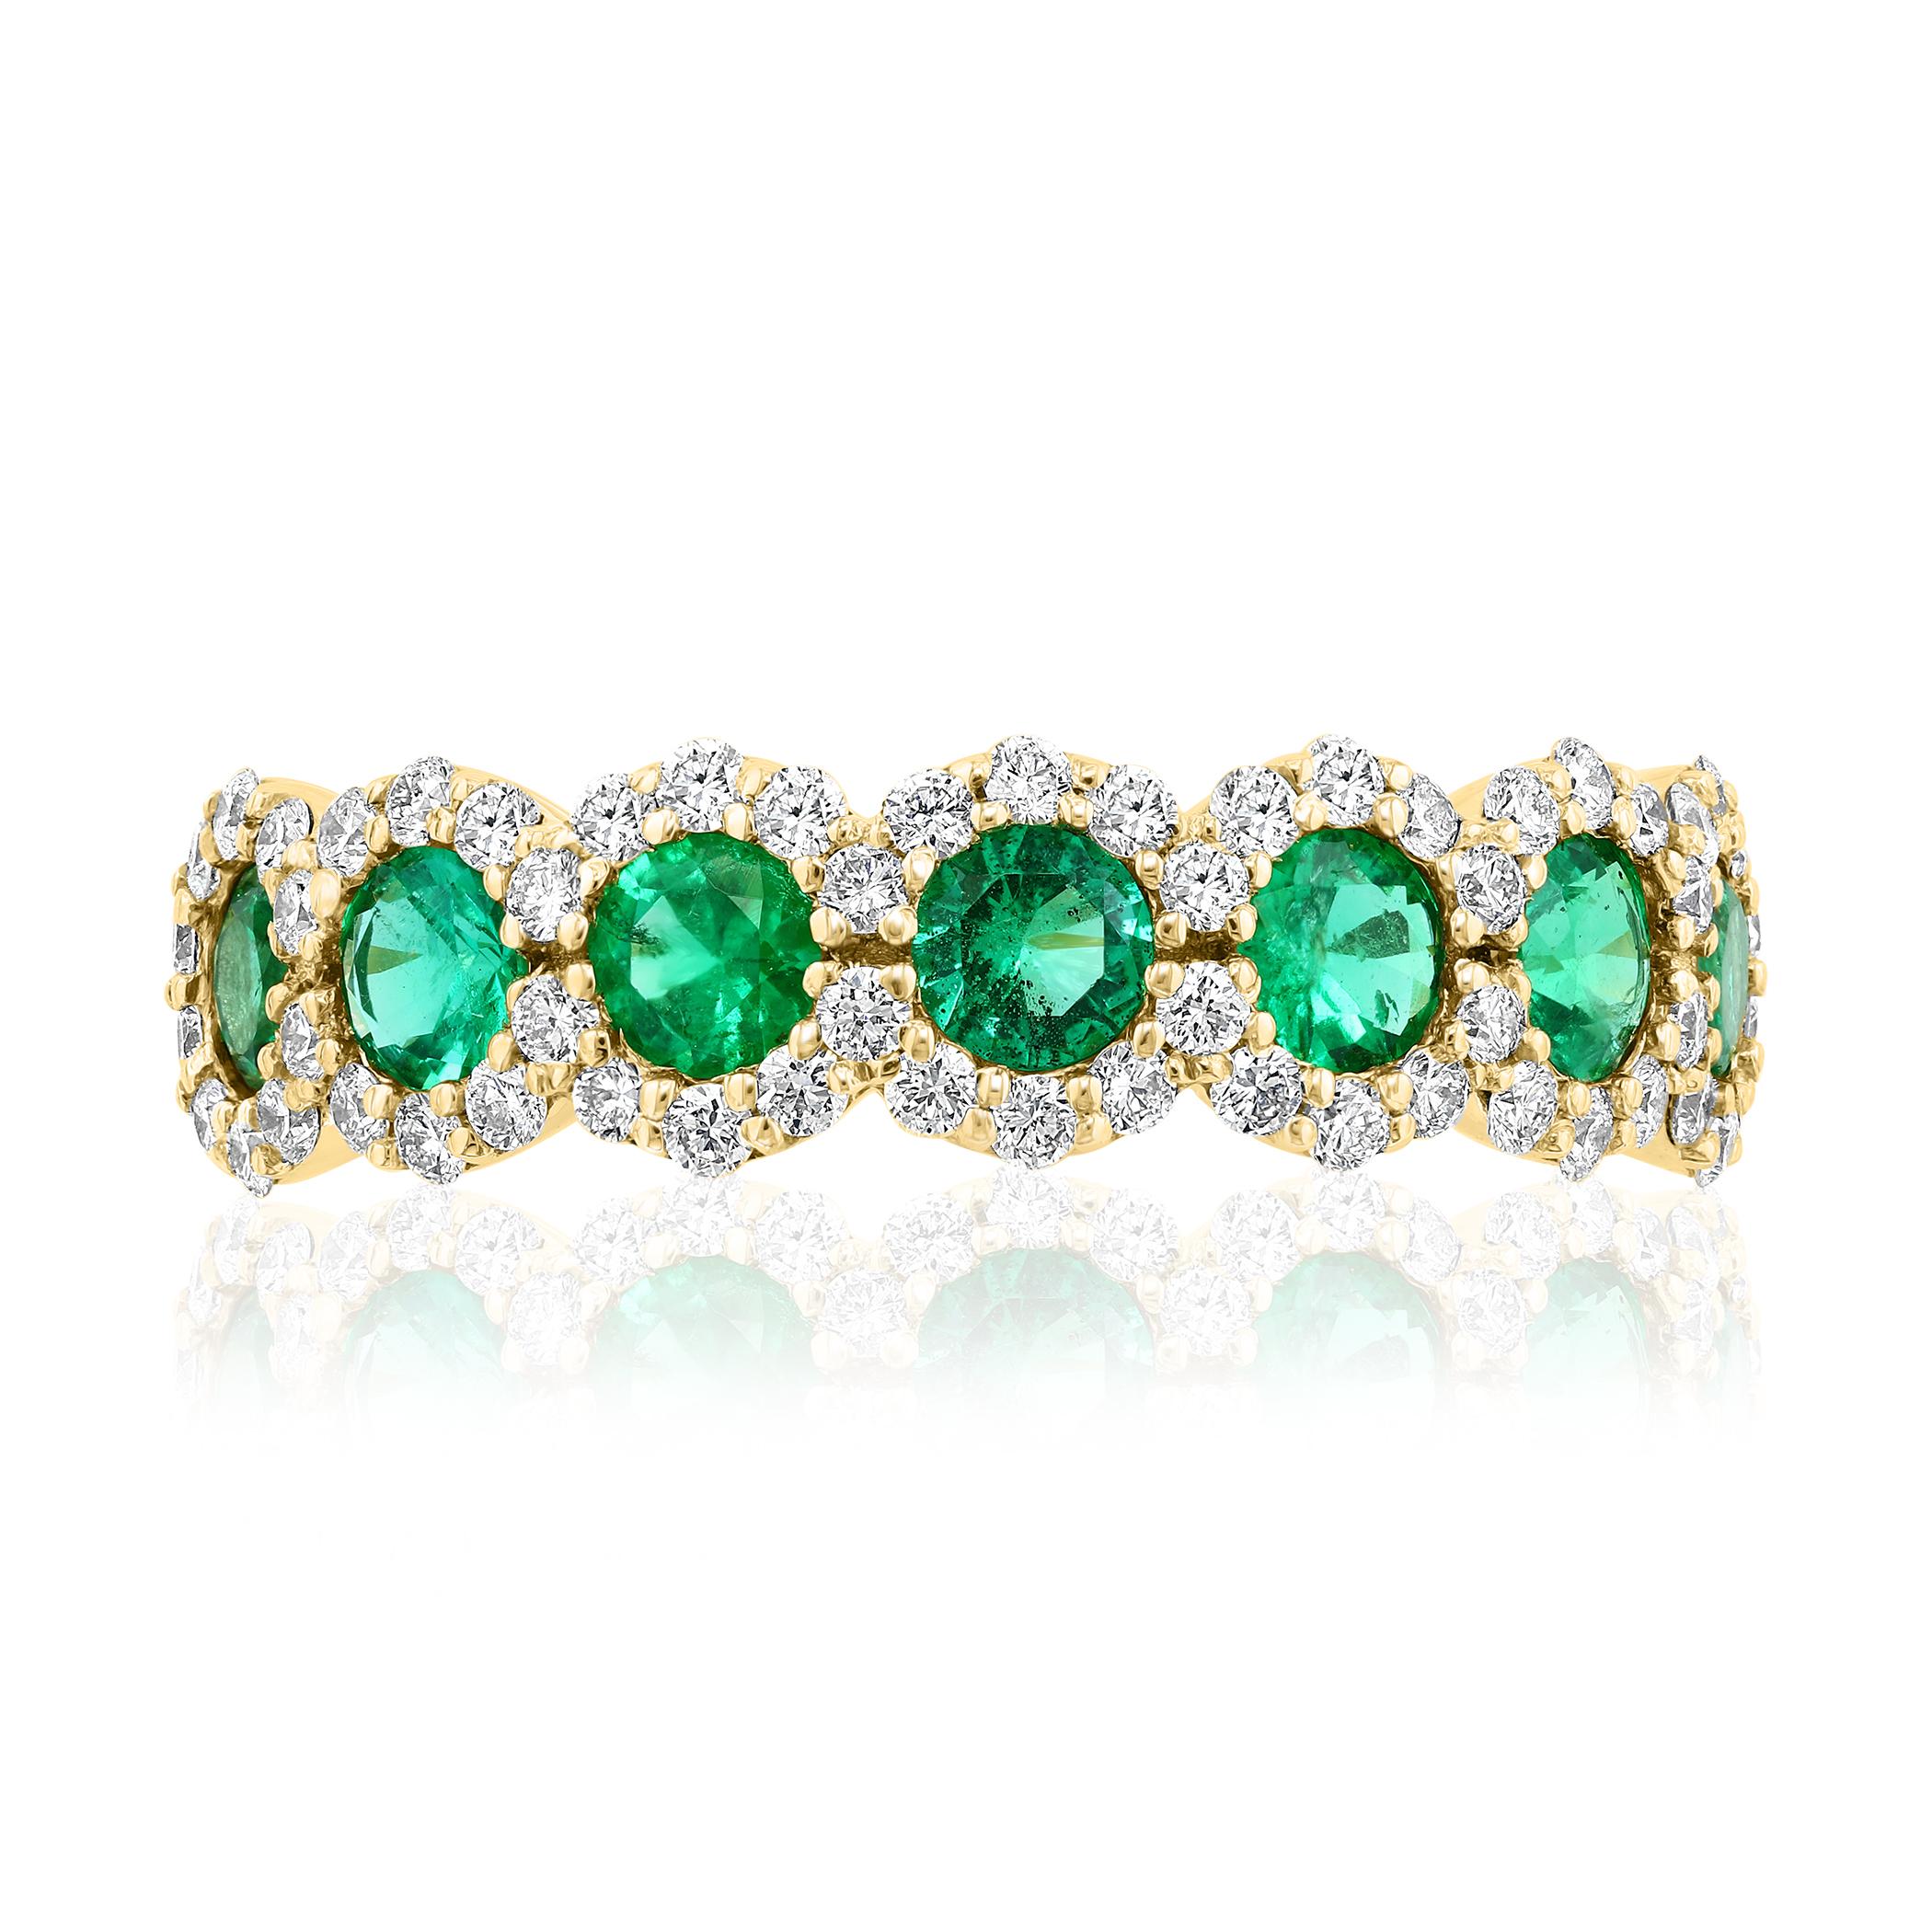 A fashionable and classic wedding band showcasing 7 color-rich green emeralds weighing 0.75 carats total that are surrounded by brilliant round diamonds weighing 1.00 carats total. Stones secured with a micro pave setting made with 14karat yellow